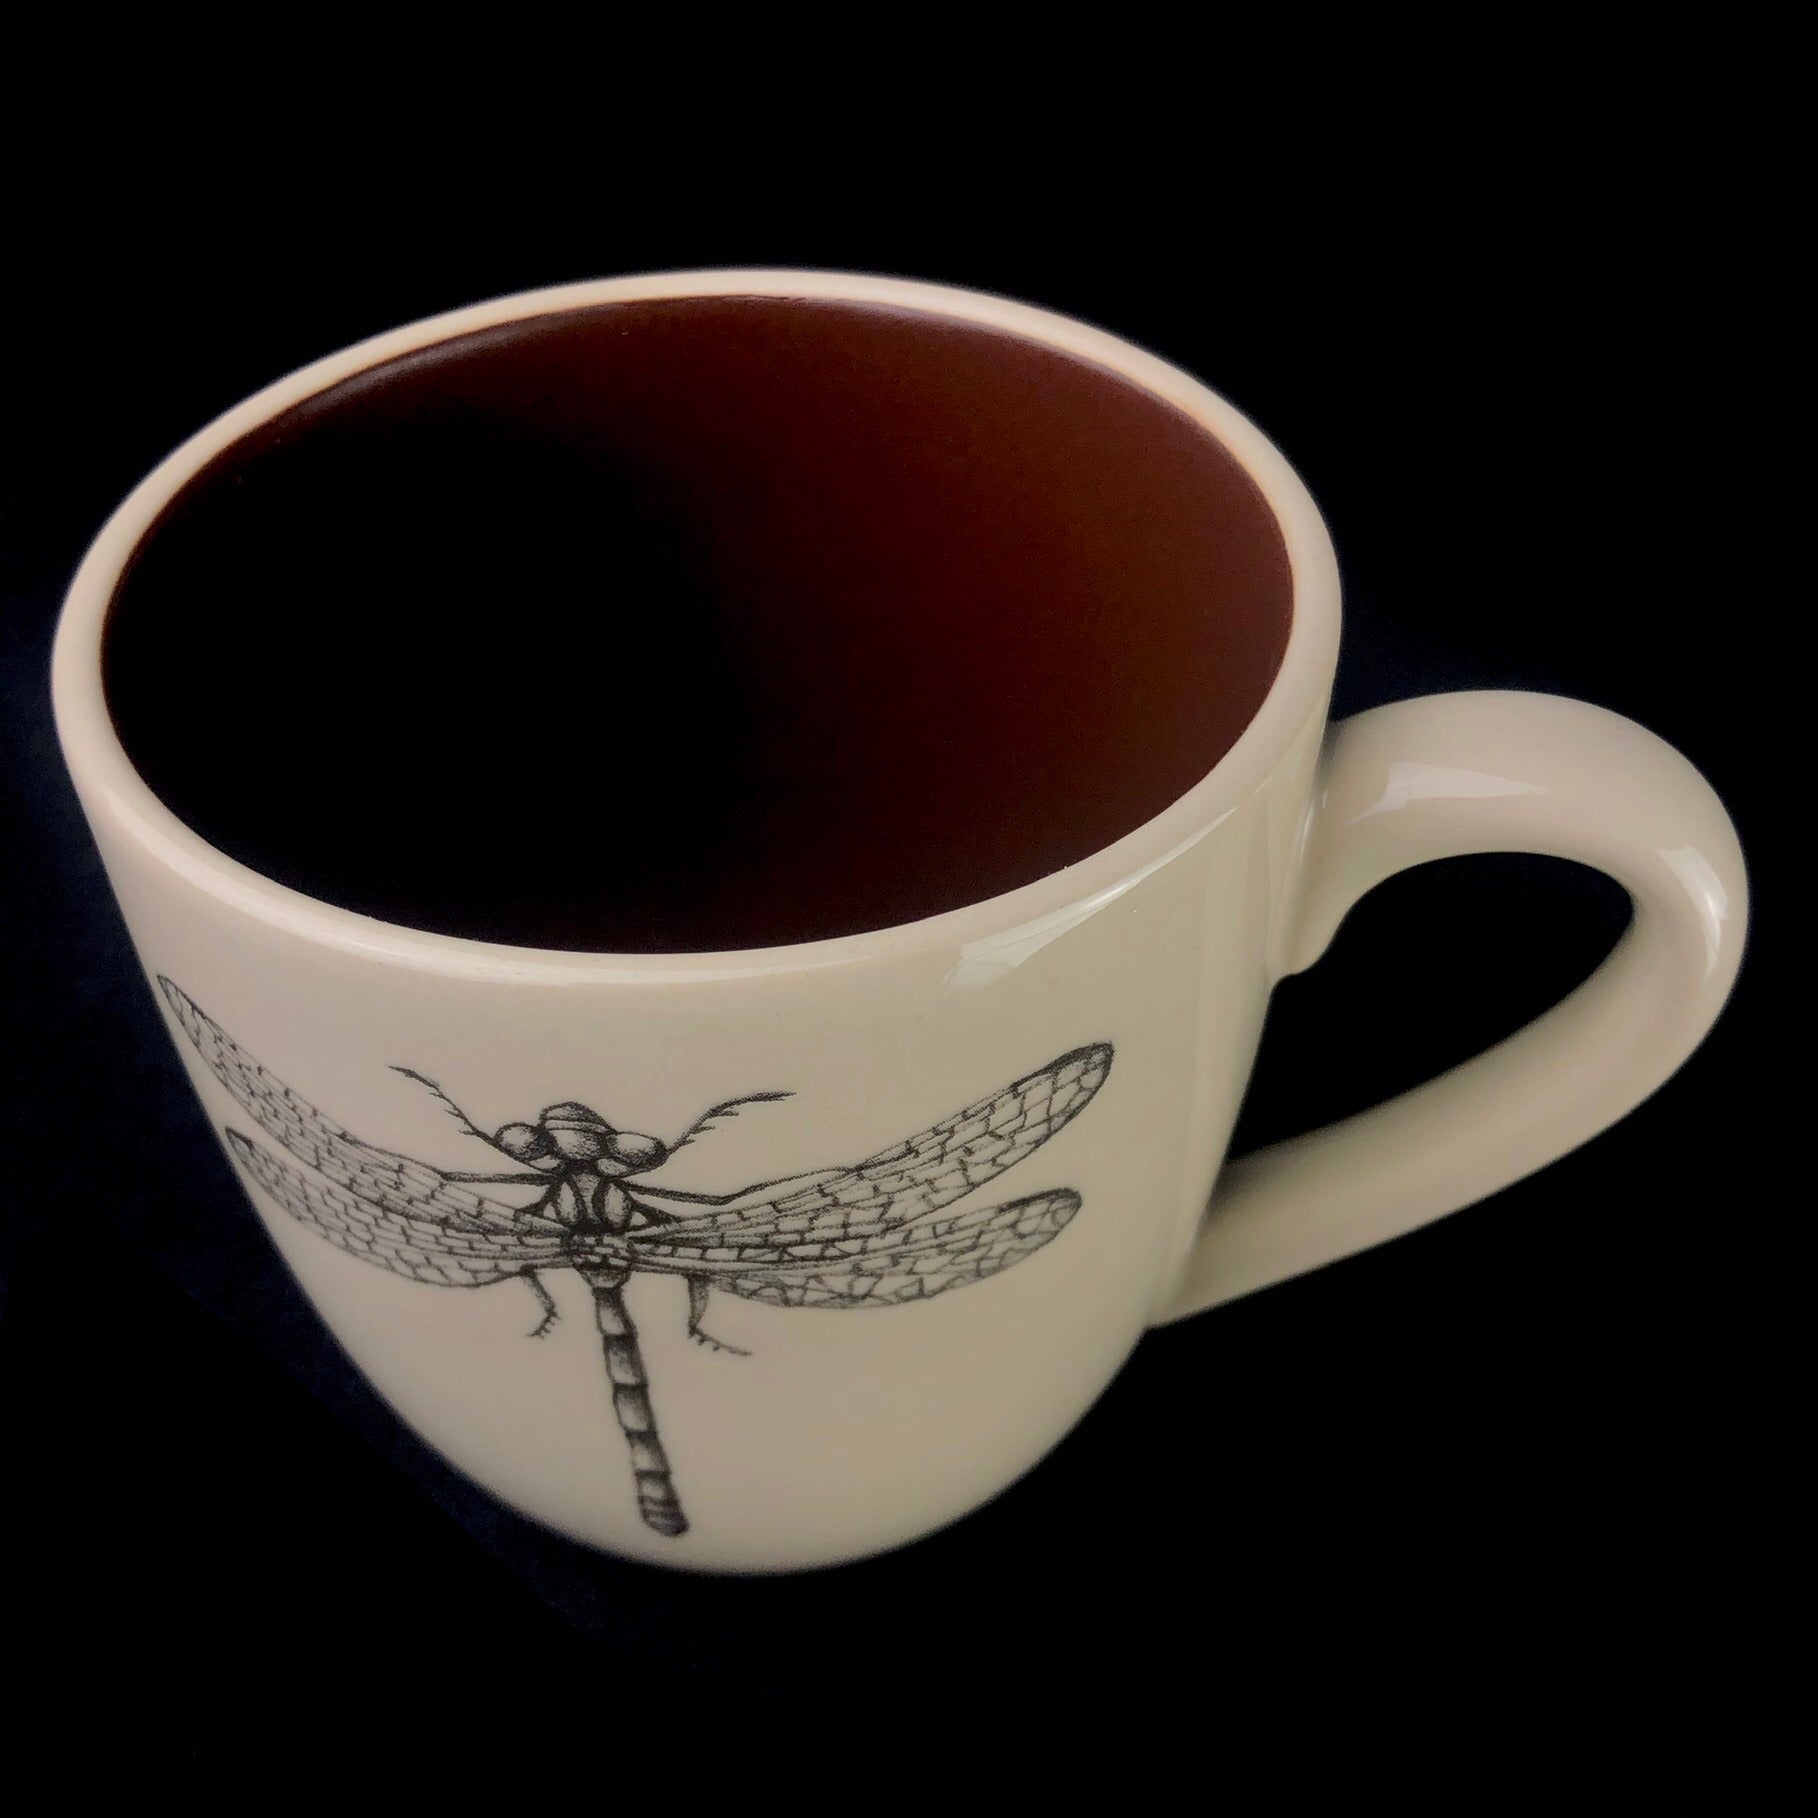 Top view of Dragonfly Mug with brown interior